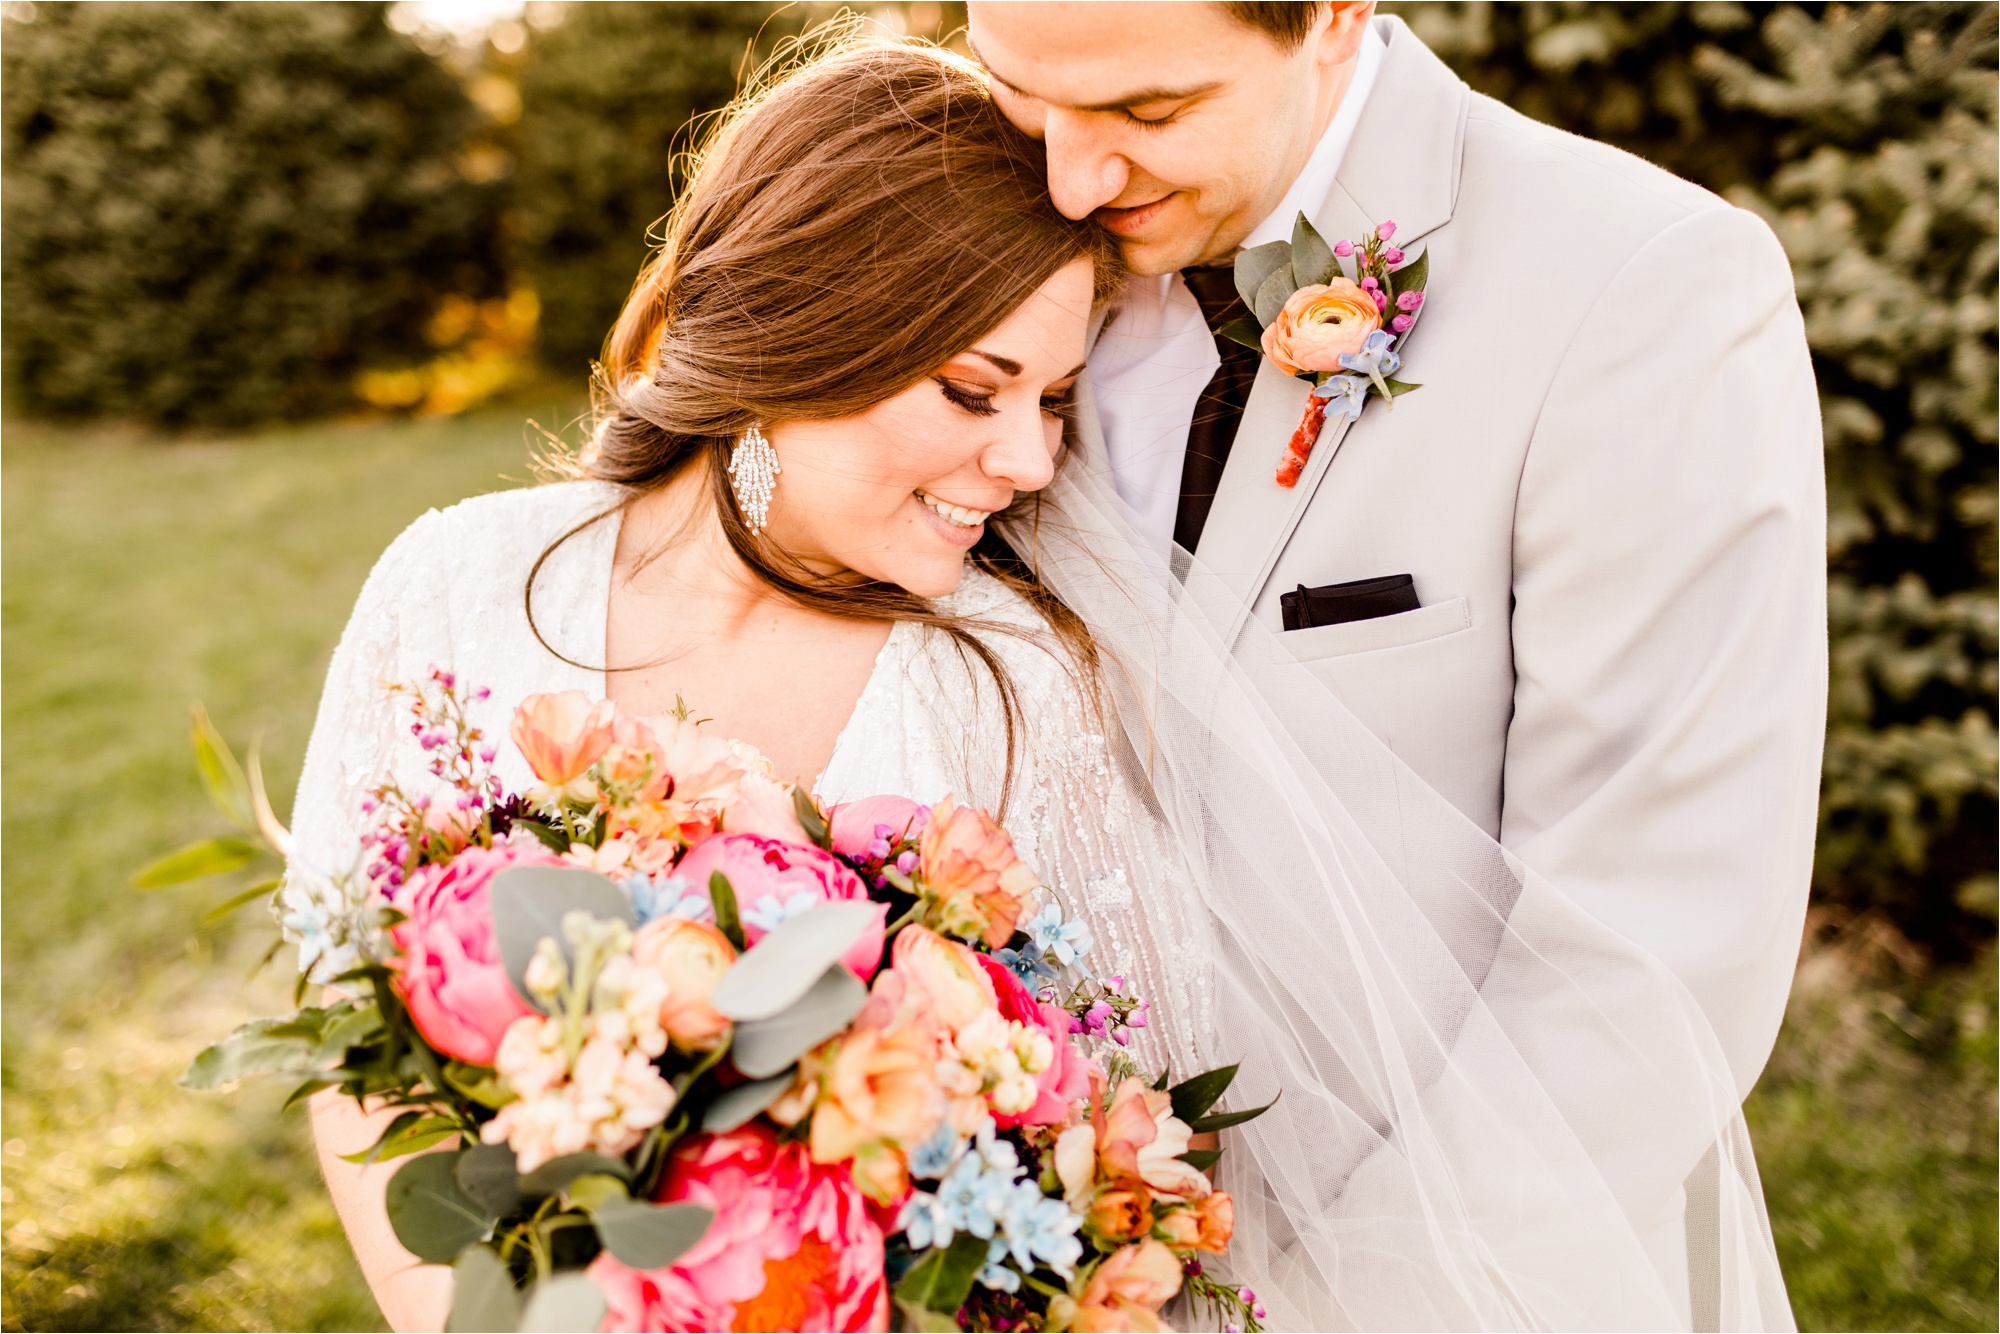 Caitlin and Luke Photography, Illinois Wedding Photographers, Champaign Wedding Photographers, Bloomington Normal Wedding Photographers, Romantic Red and Pink Sunset Styled Shoot_9551.jpg